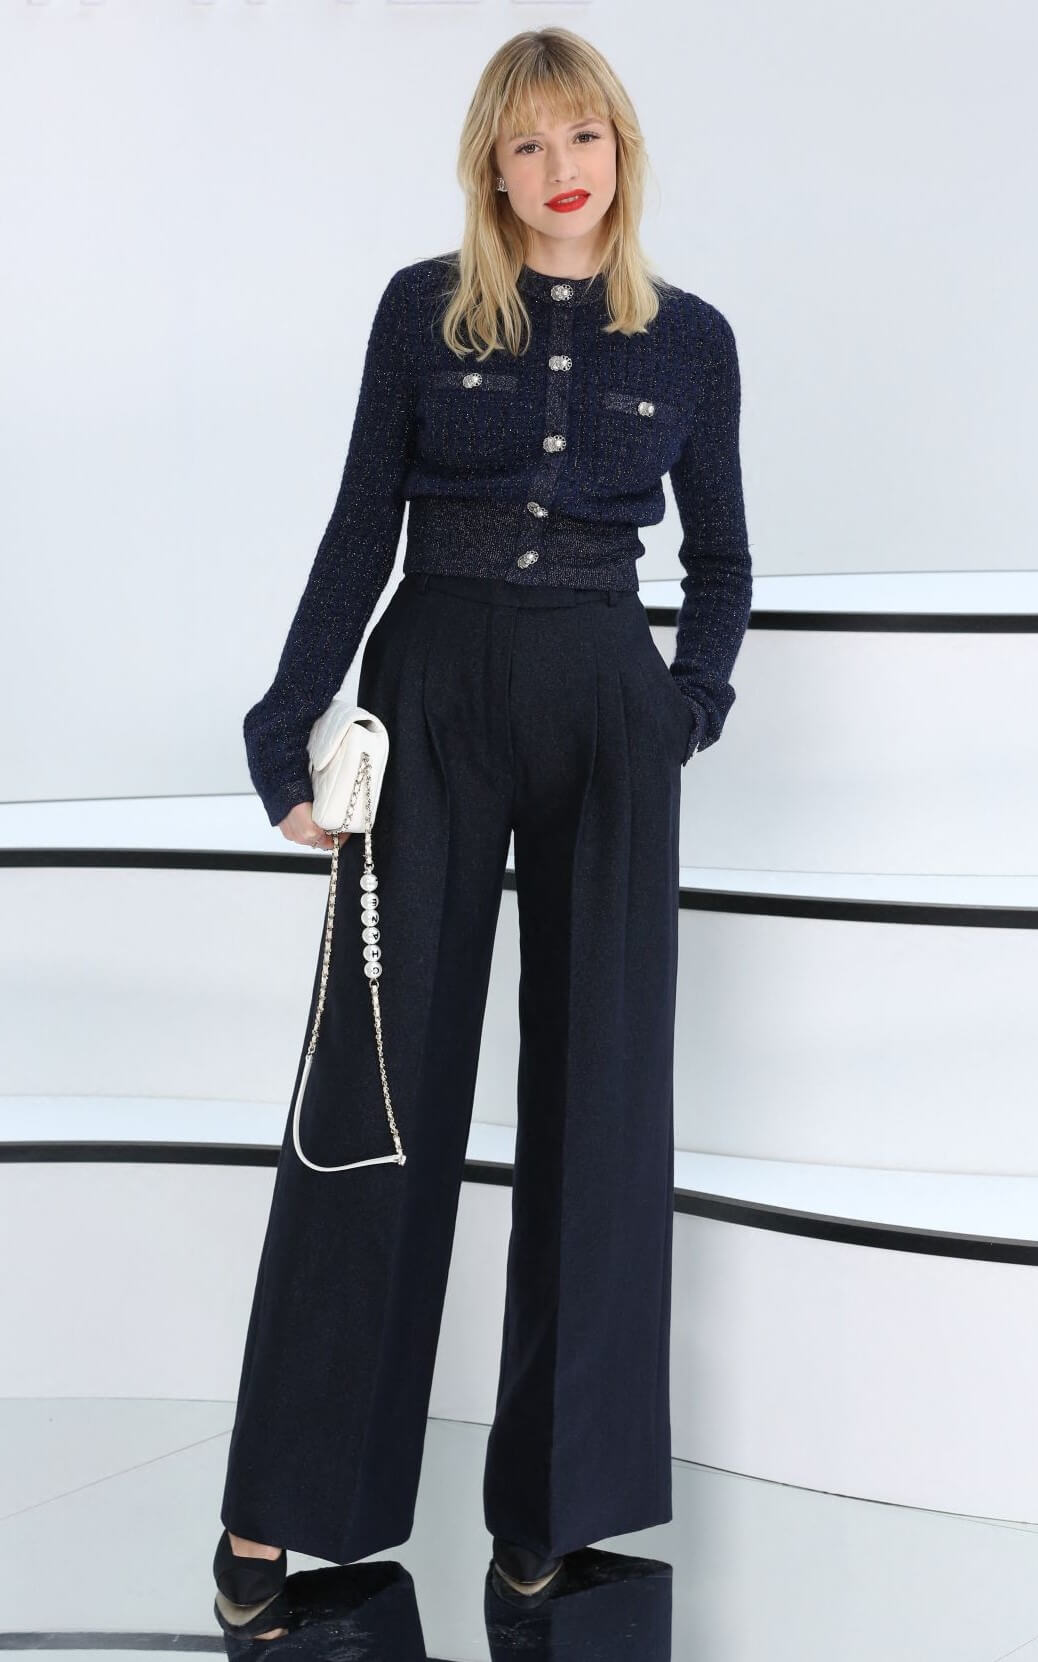 Angele  In Blue Full Sleeves Woven Top & Flare Pants With White Handbags At Chanel Show at Paris Fashion Week